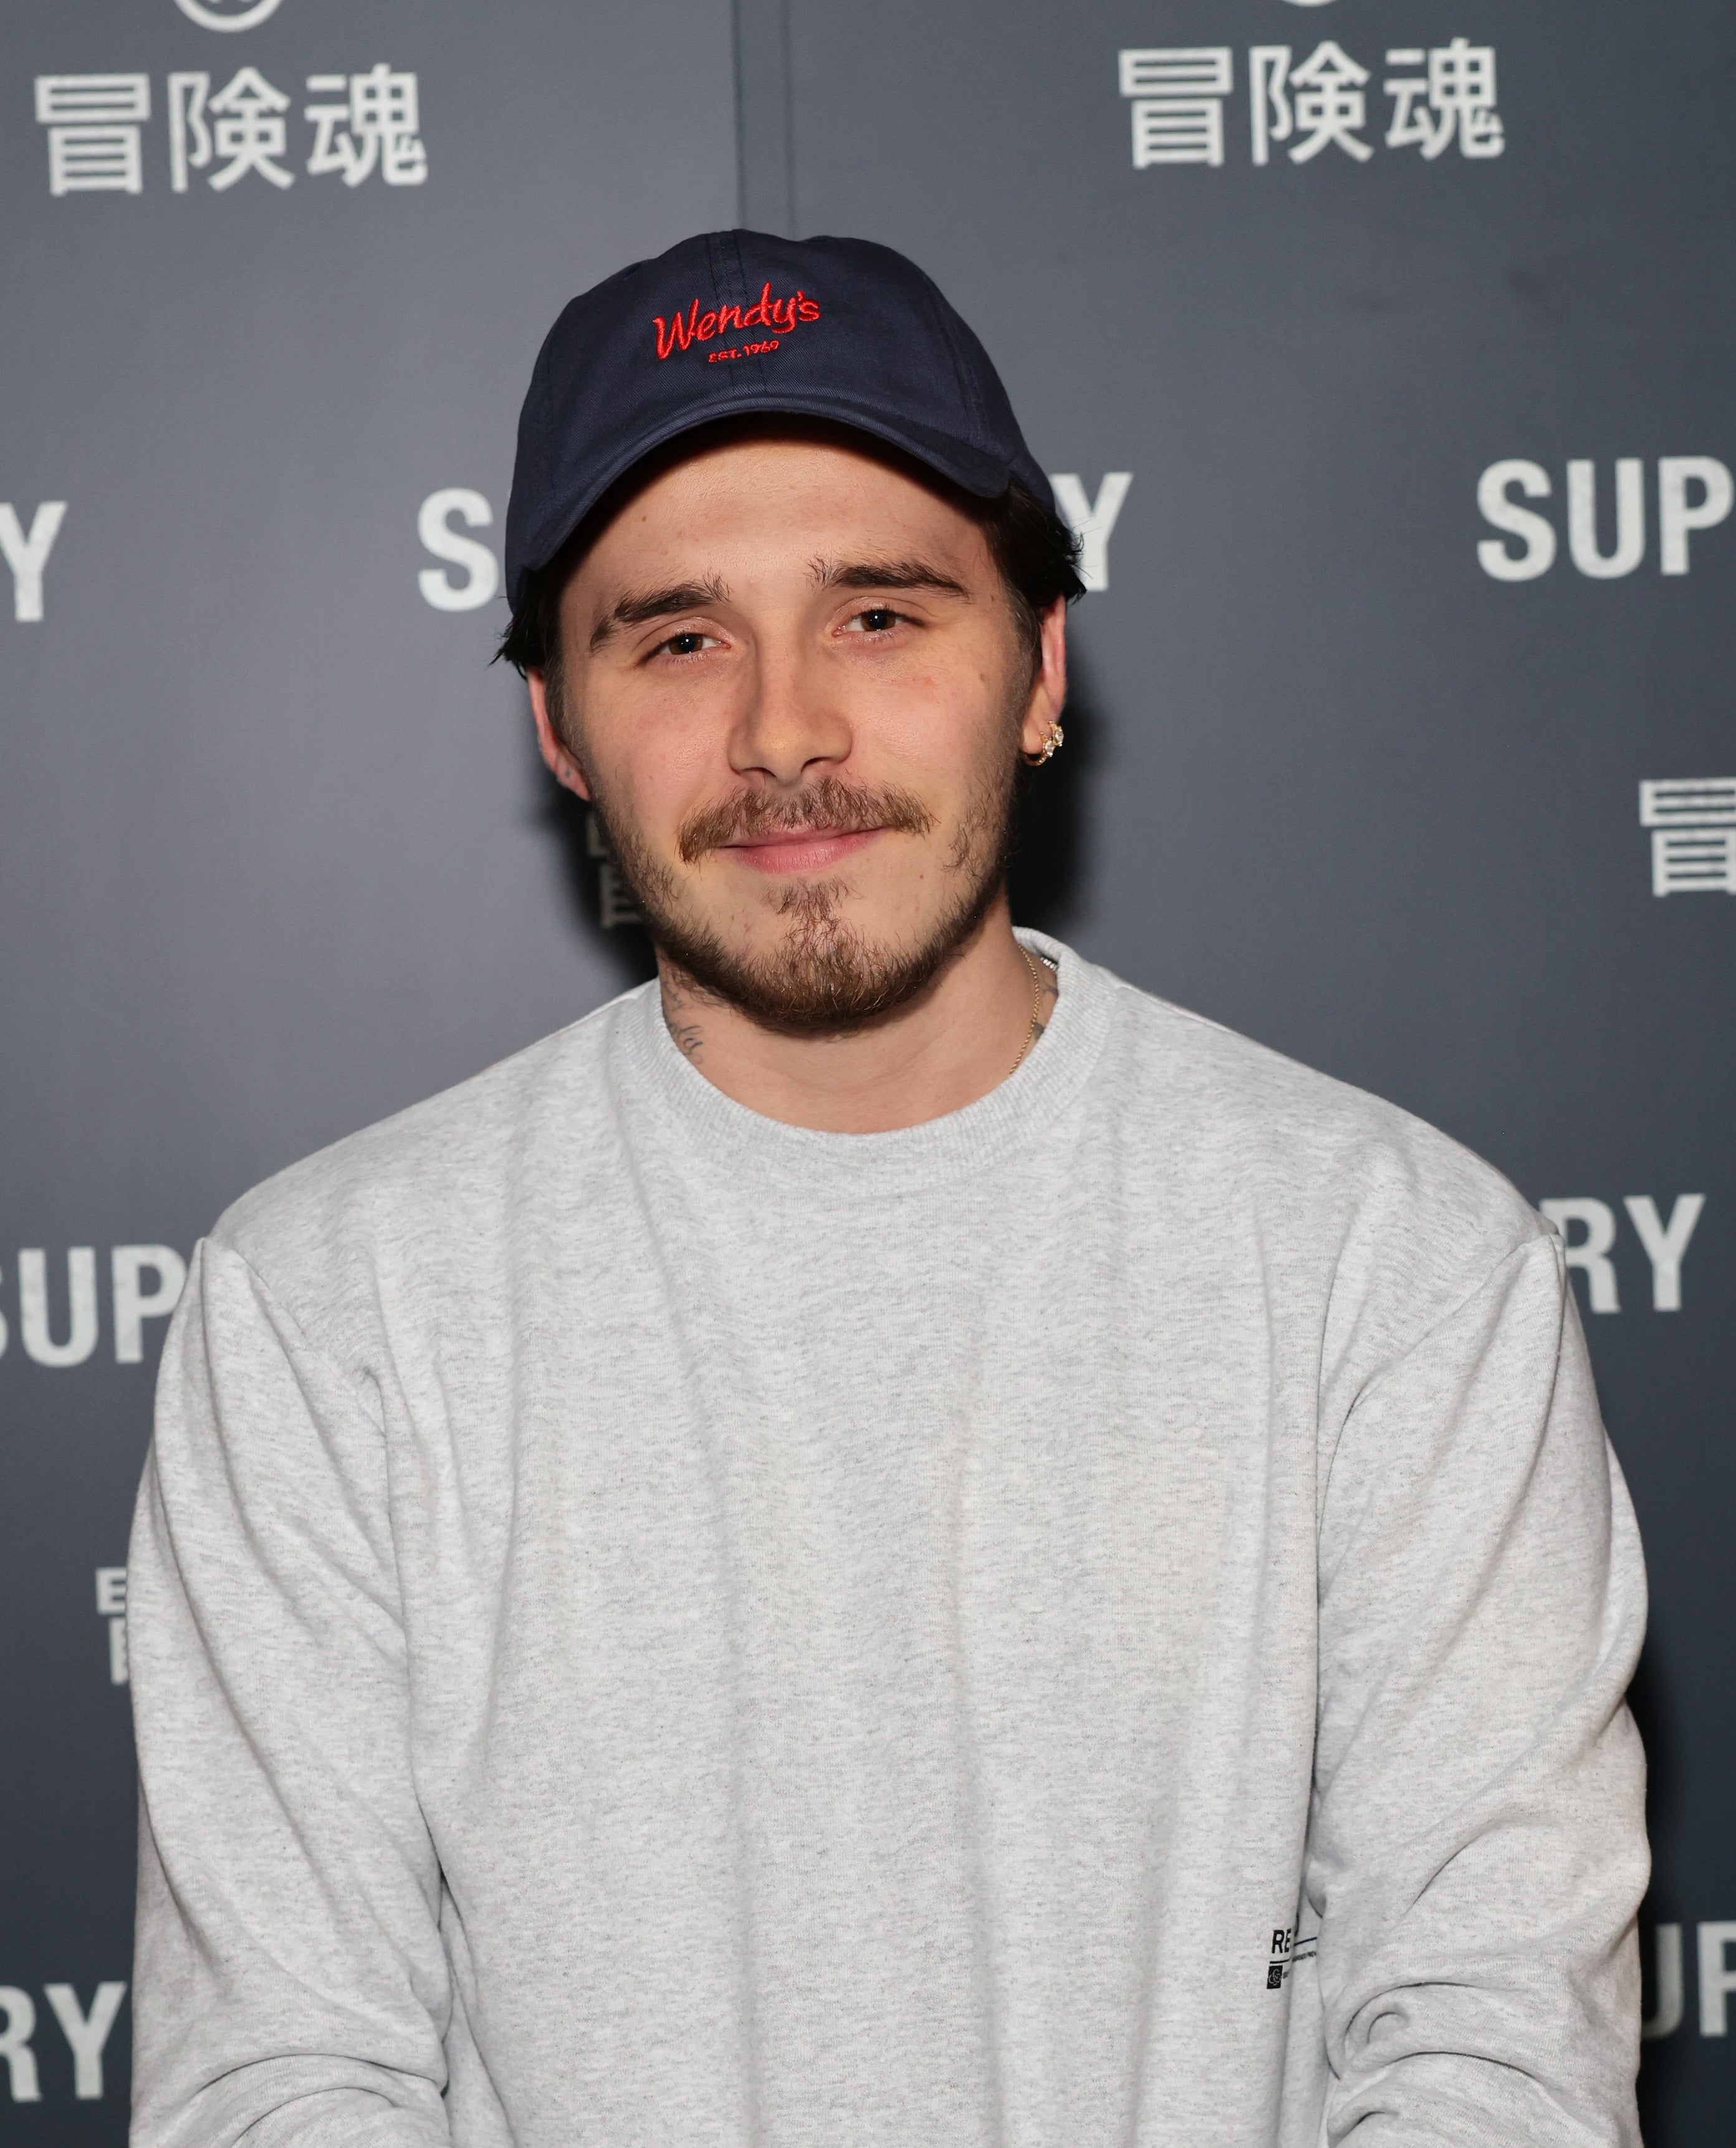 Close-up of Brooklyn at a media event wearing a shirt and cap